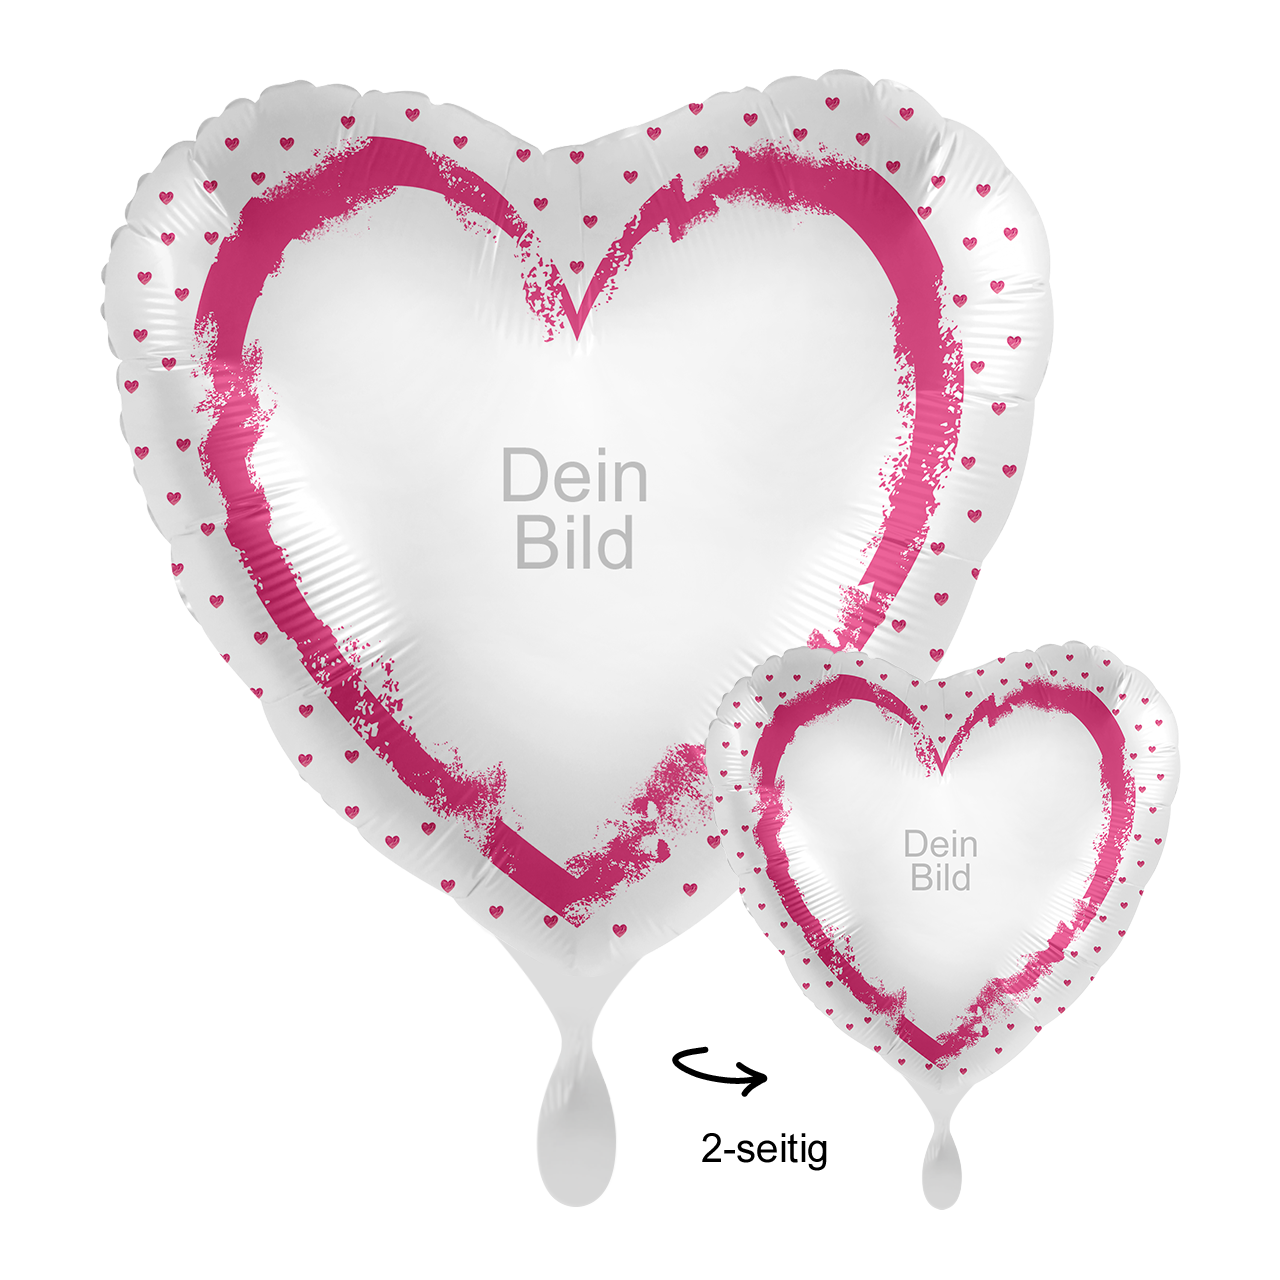 1 Ballon mit Foto - With All My Heart